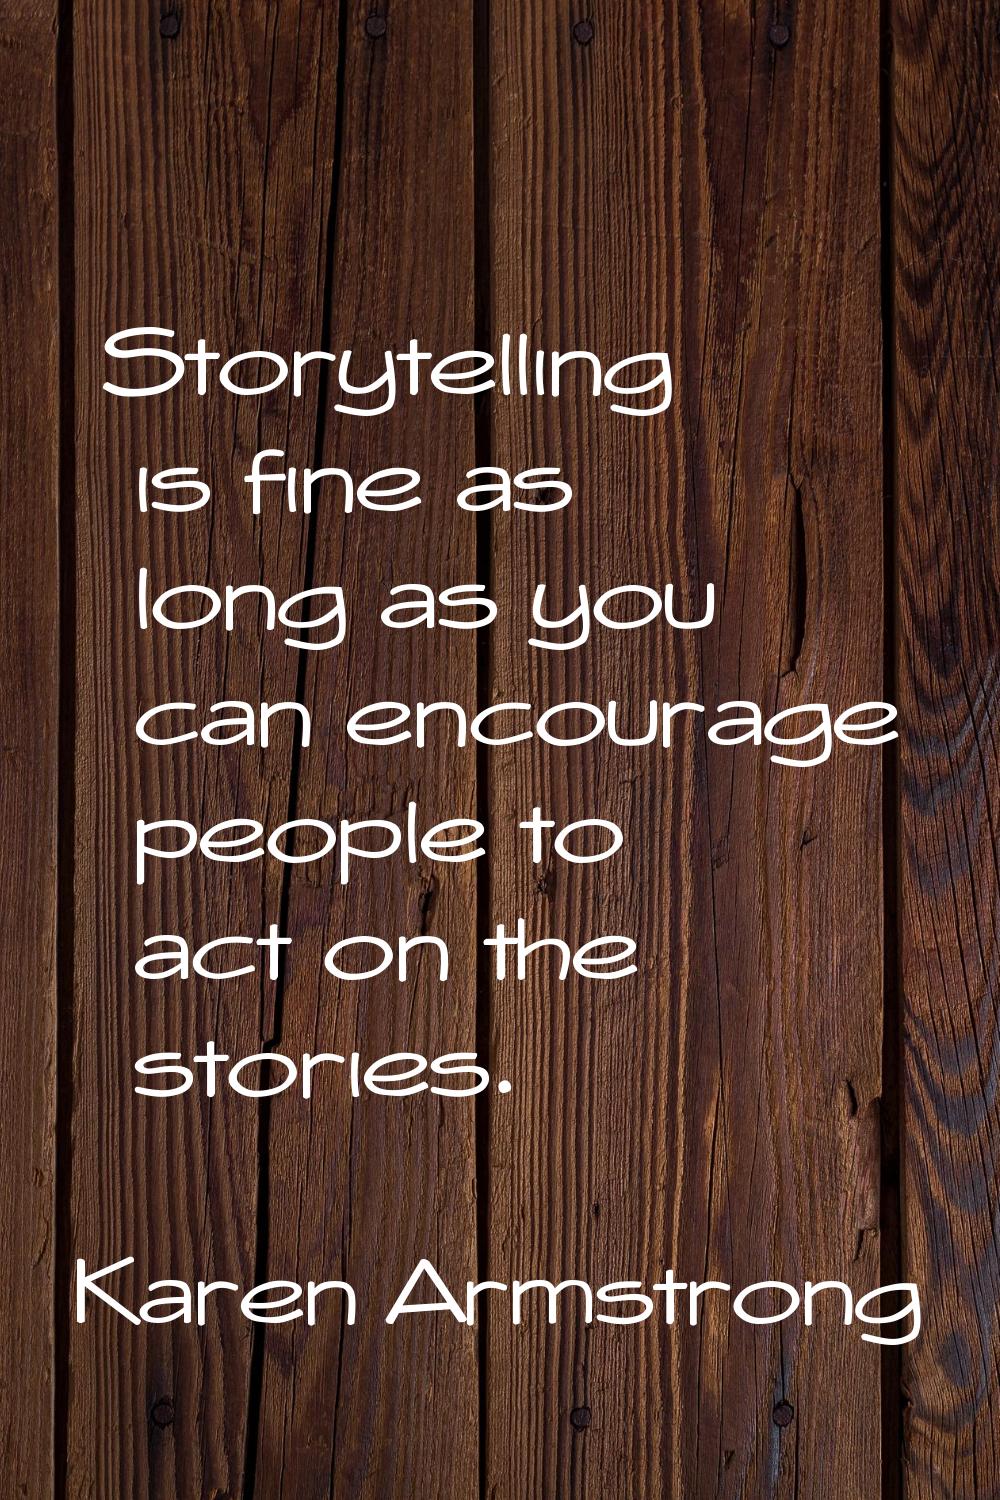 Storytelling is fine as long as you can encourage people to act on the stories.